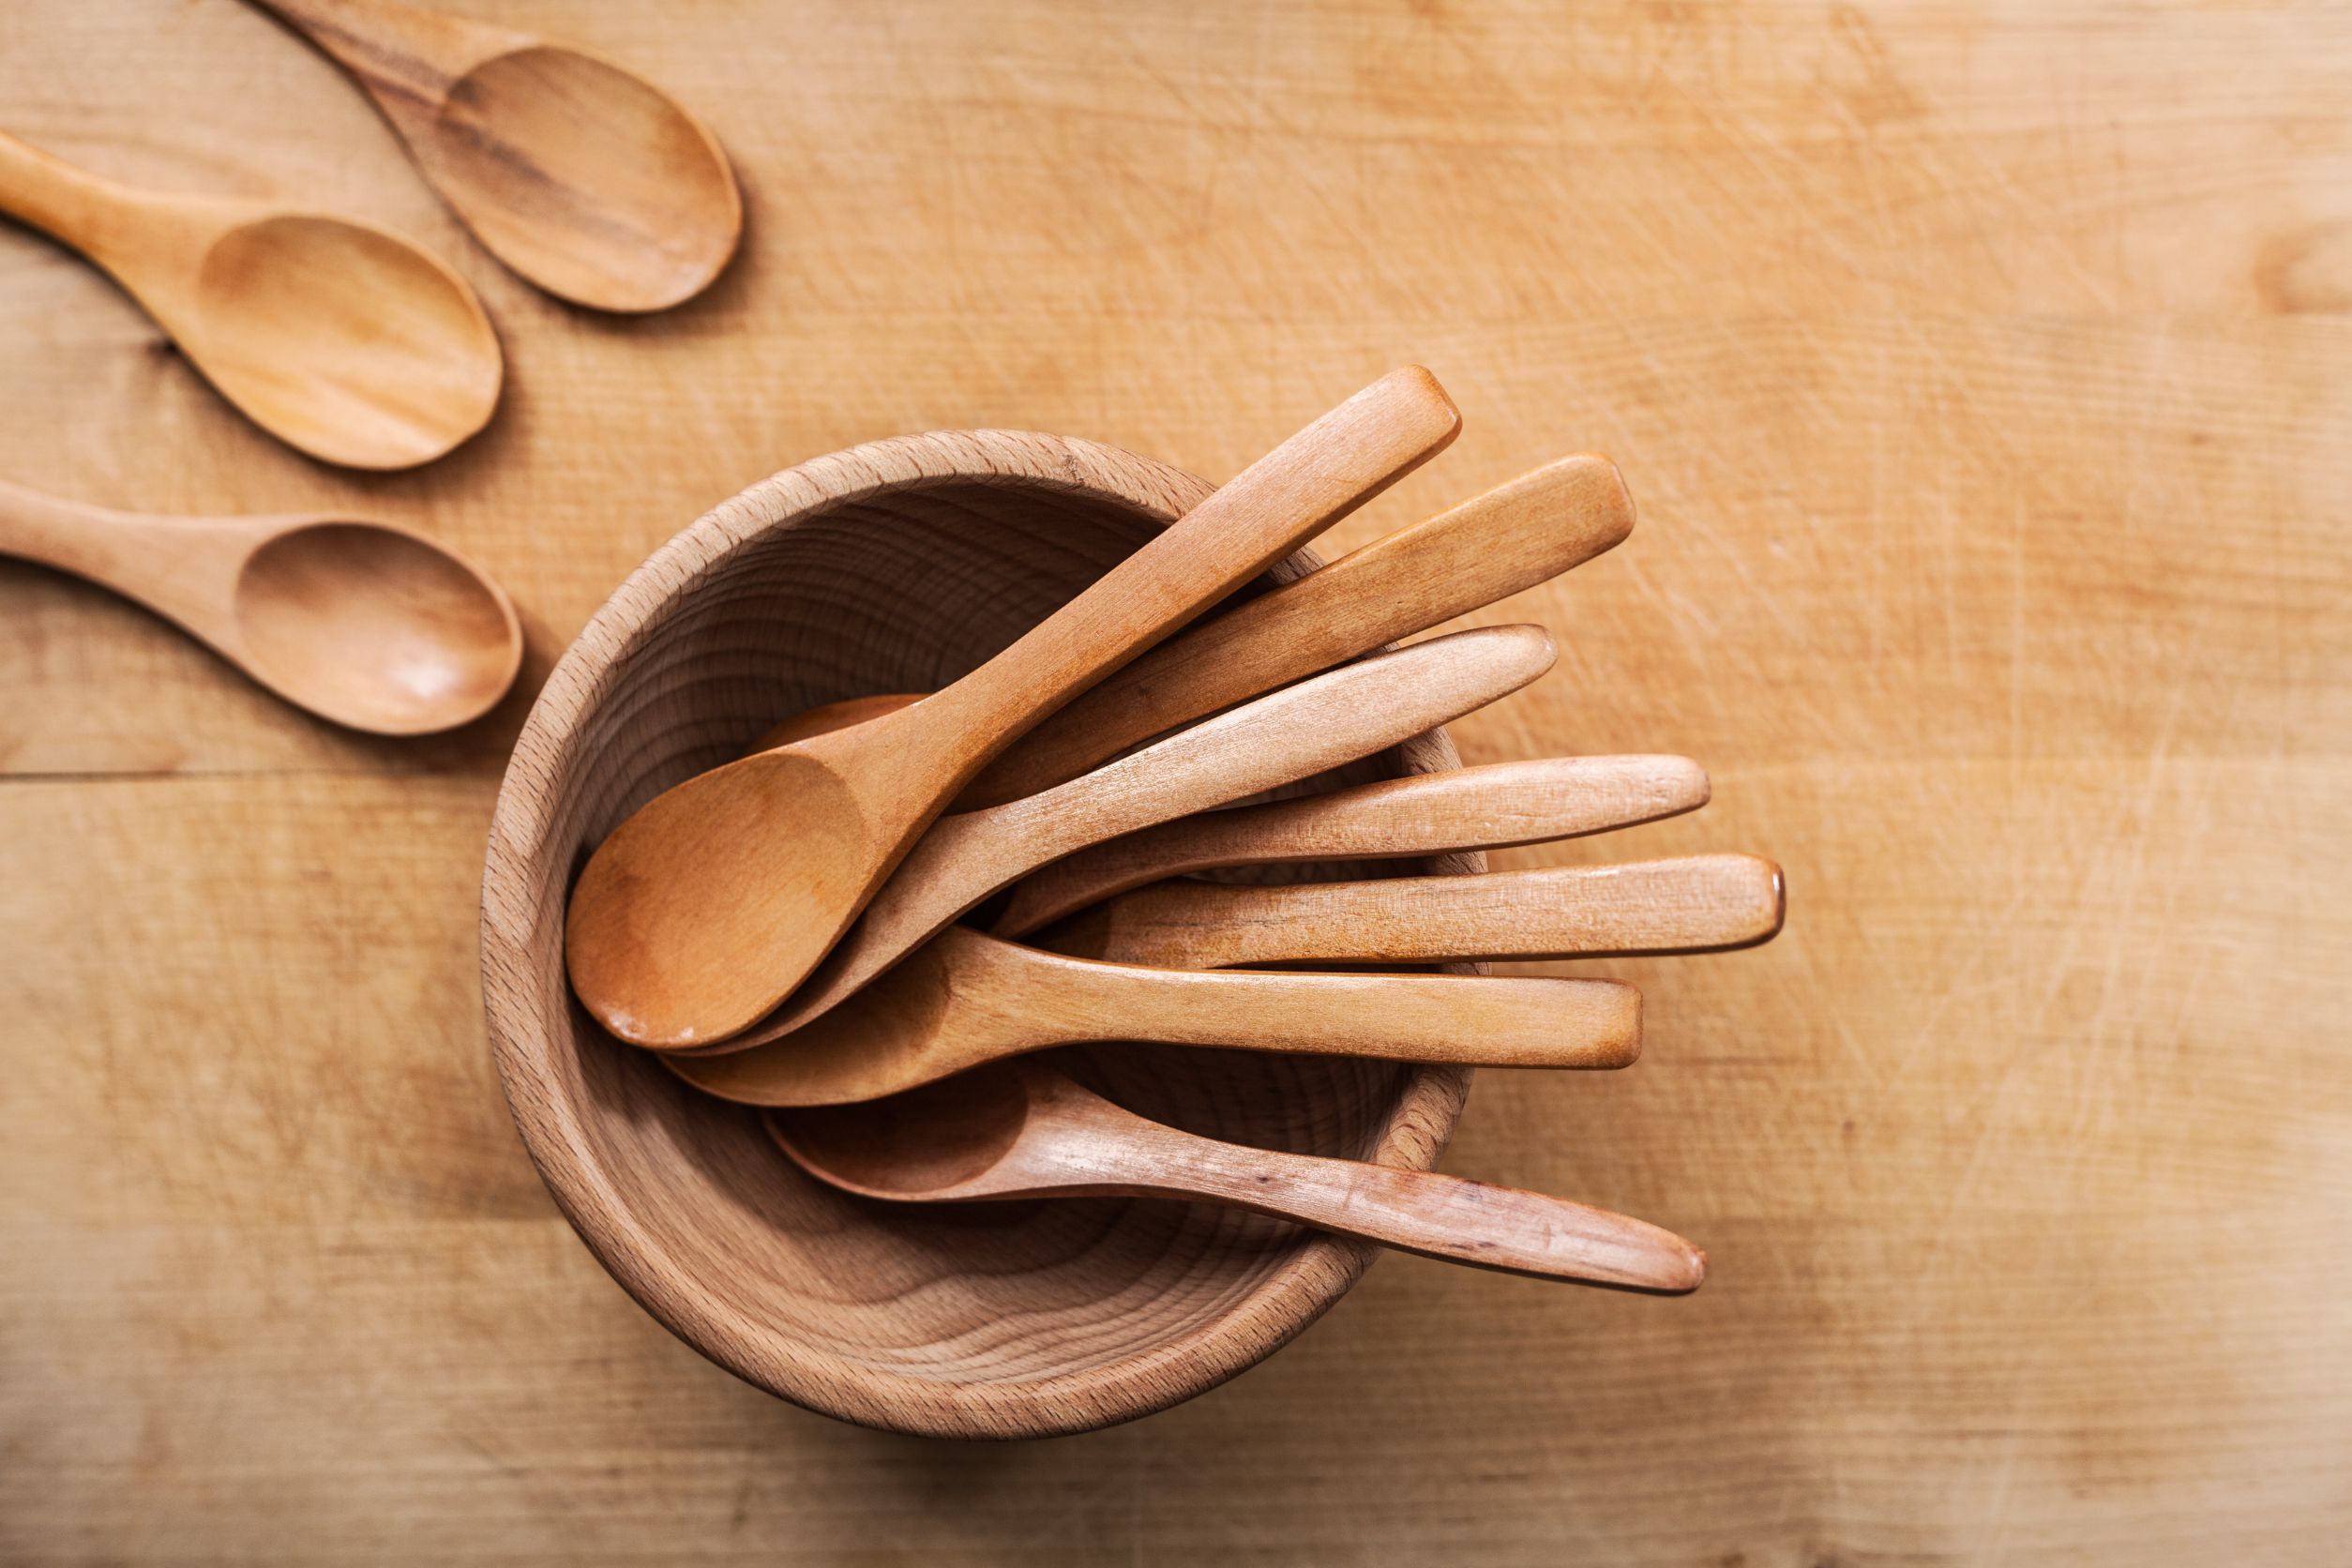 Your first cooking utensil was a wooden spoon